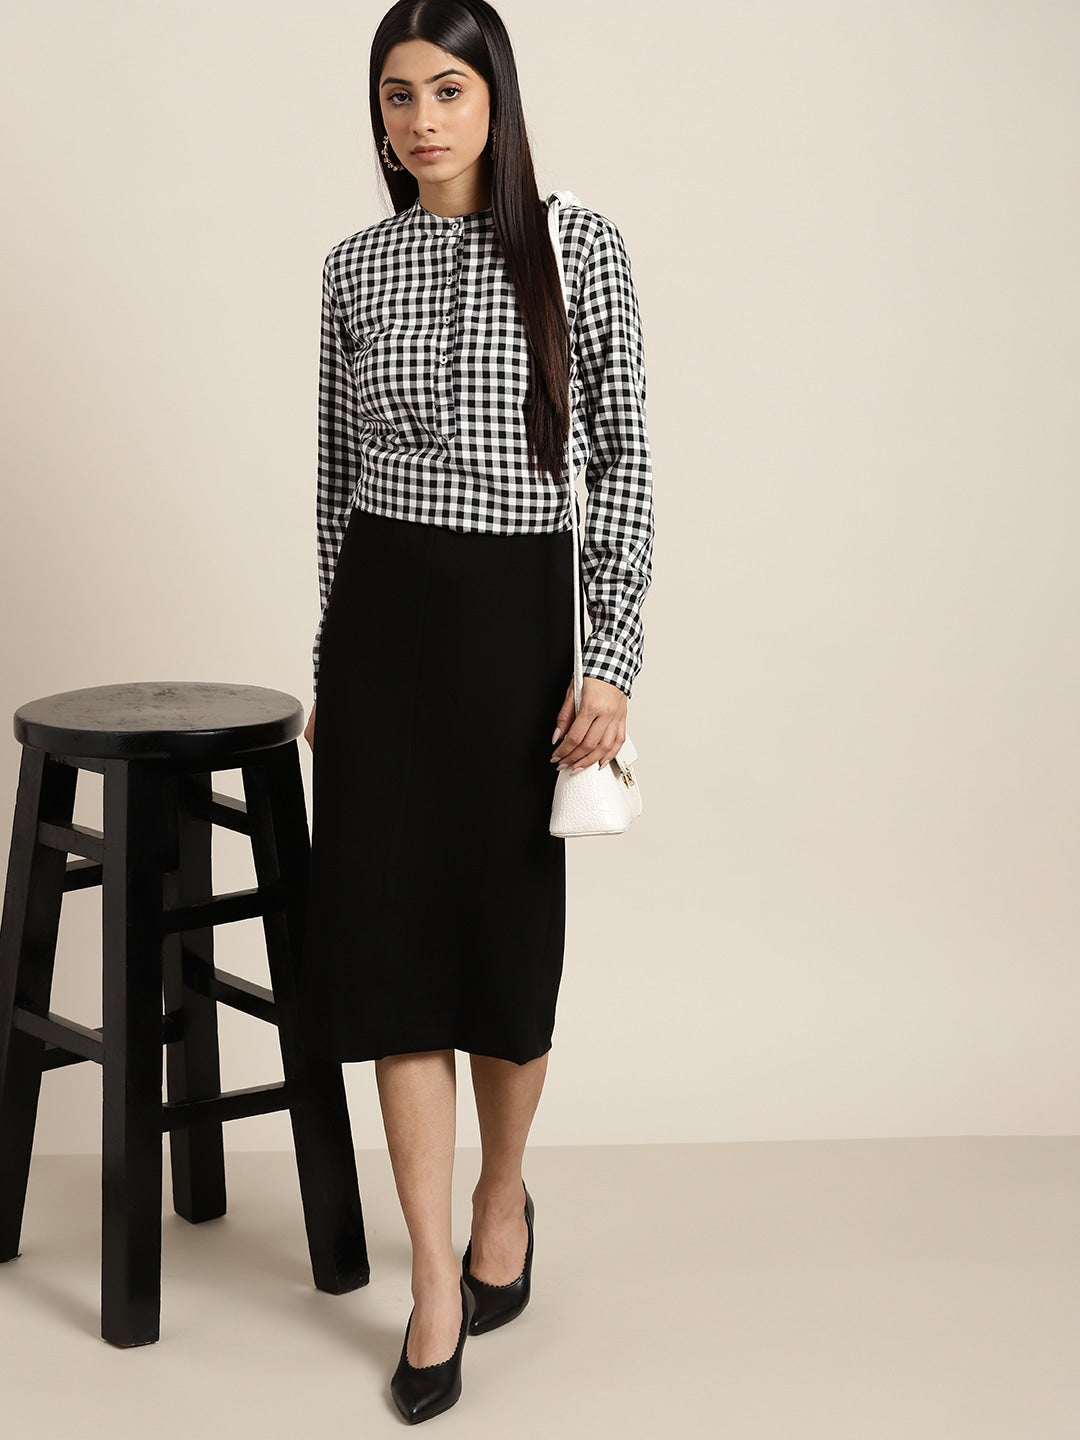 Women Black & White Checked Pure Cotton Slim Fit Formal Top